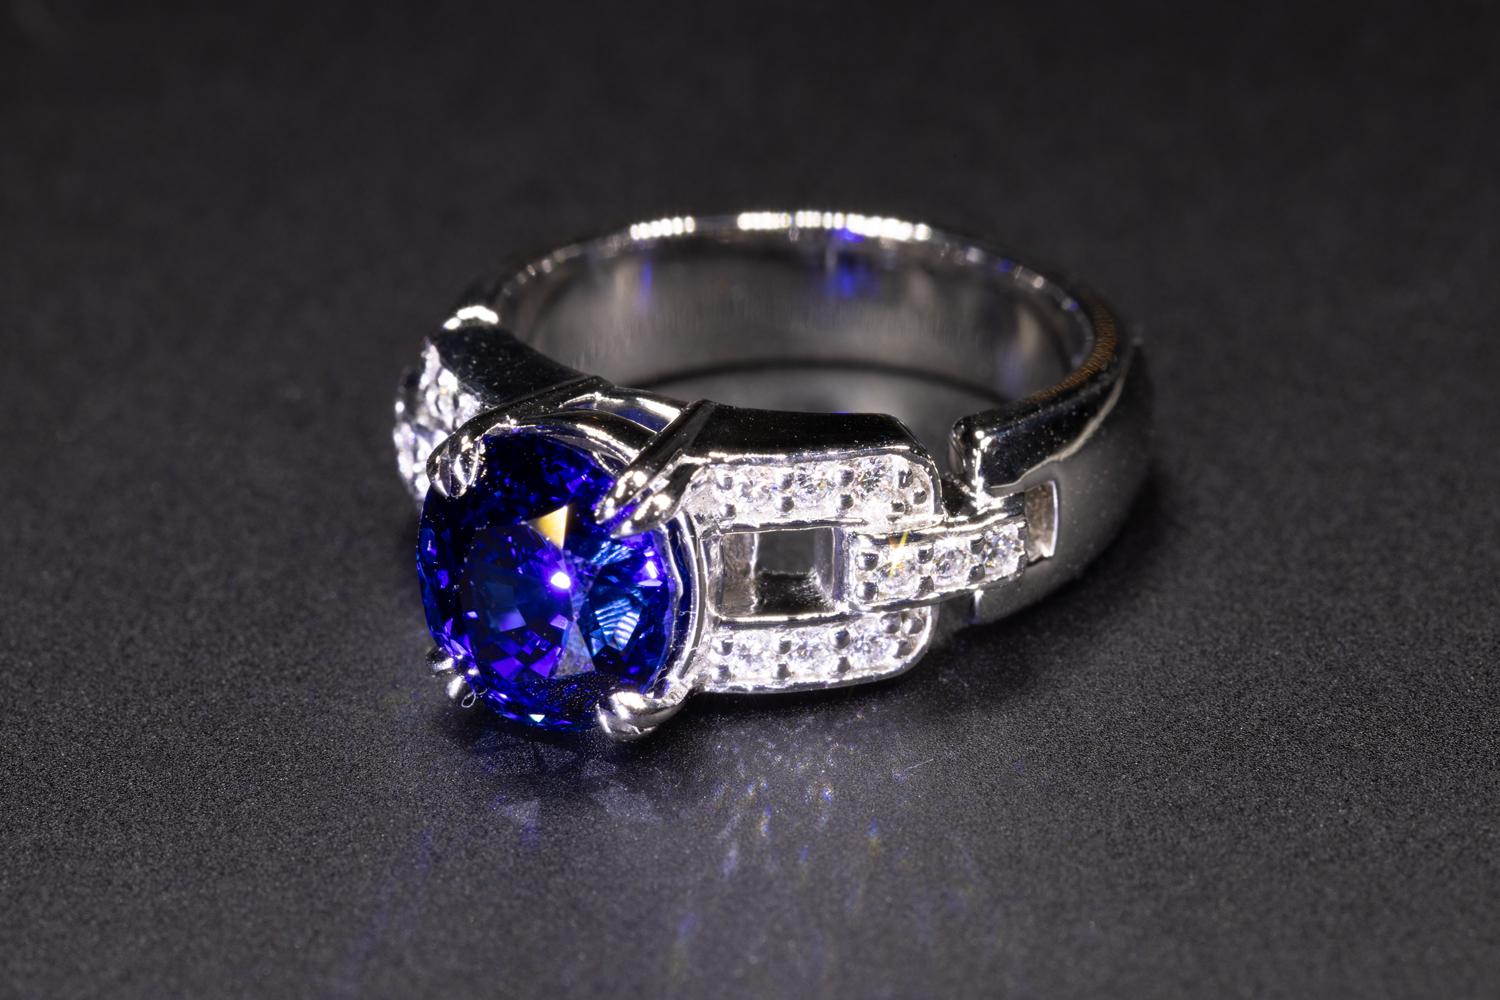 This is a beautiful Blue Ceylon Natural untreated 4.032 Sapphire ring set in a custom made platinum setting. The sapphire is accented by diamond accents and is set in a classic platinum setting. This is a timeless piece of jewelry made by Martoni &